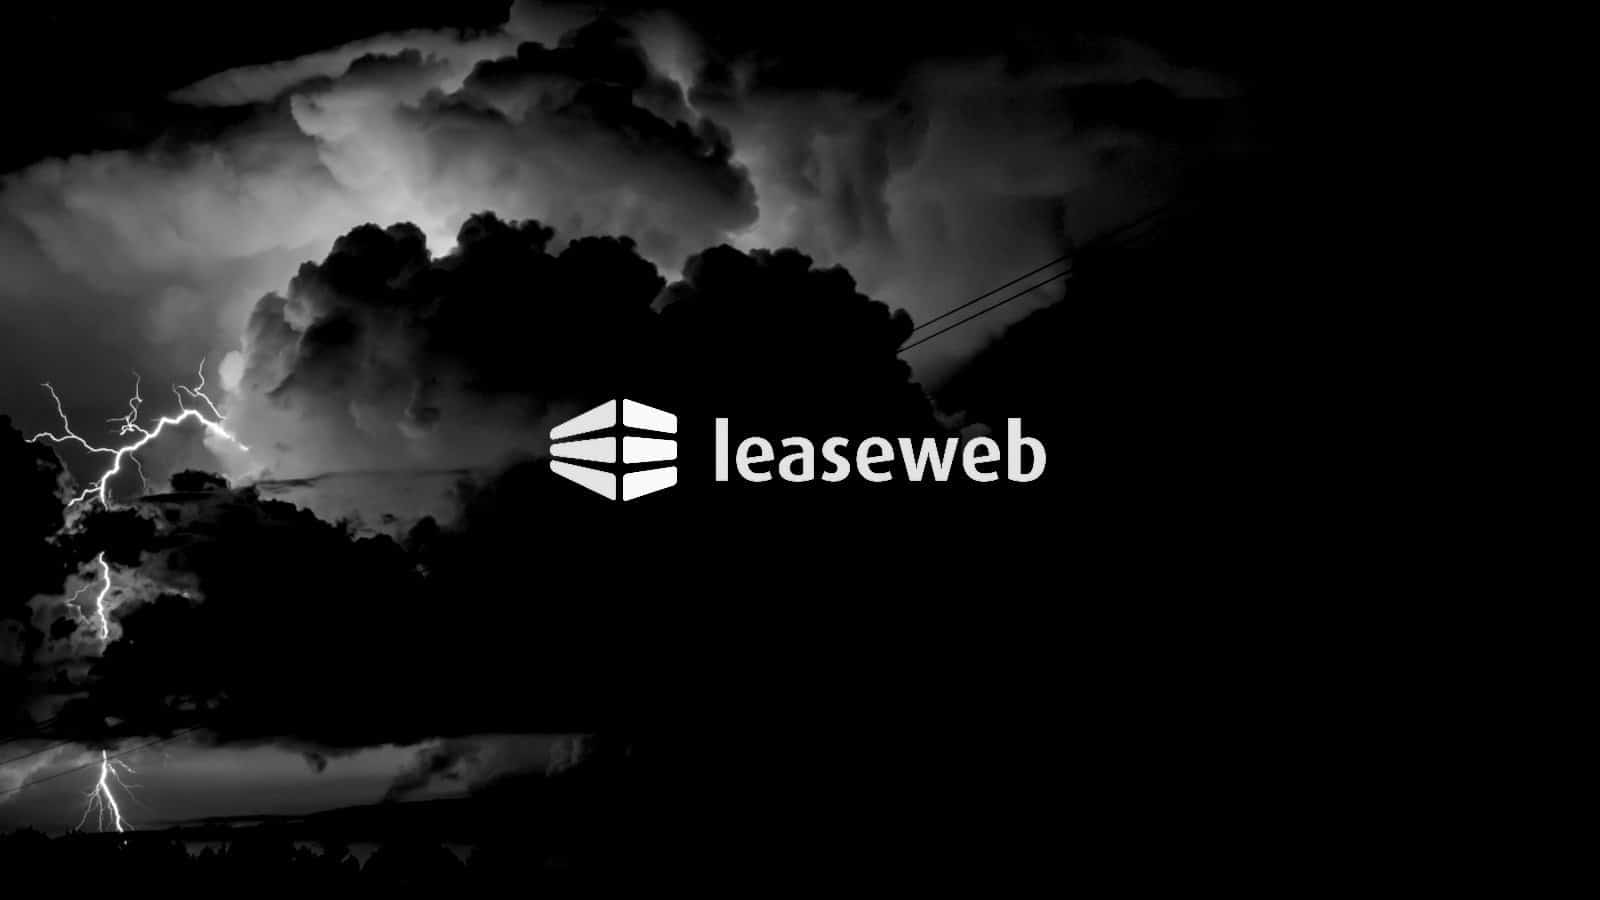 Leaseweb is restoring ‘critical’ systems after security breach